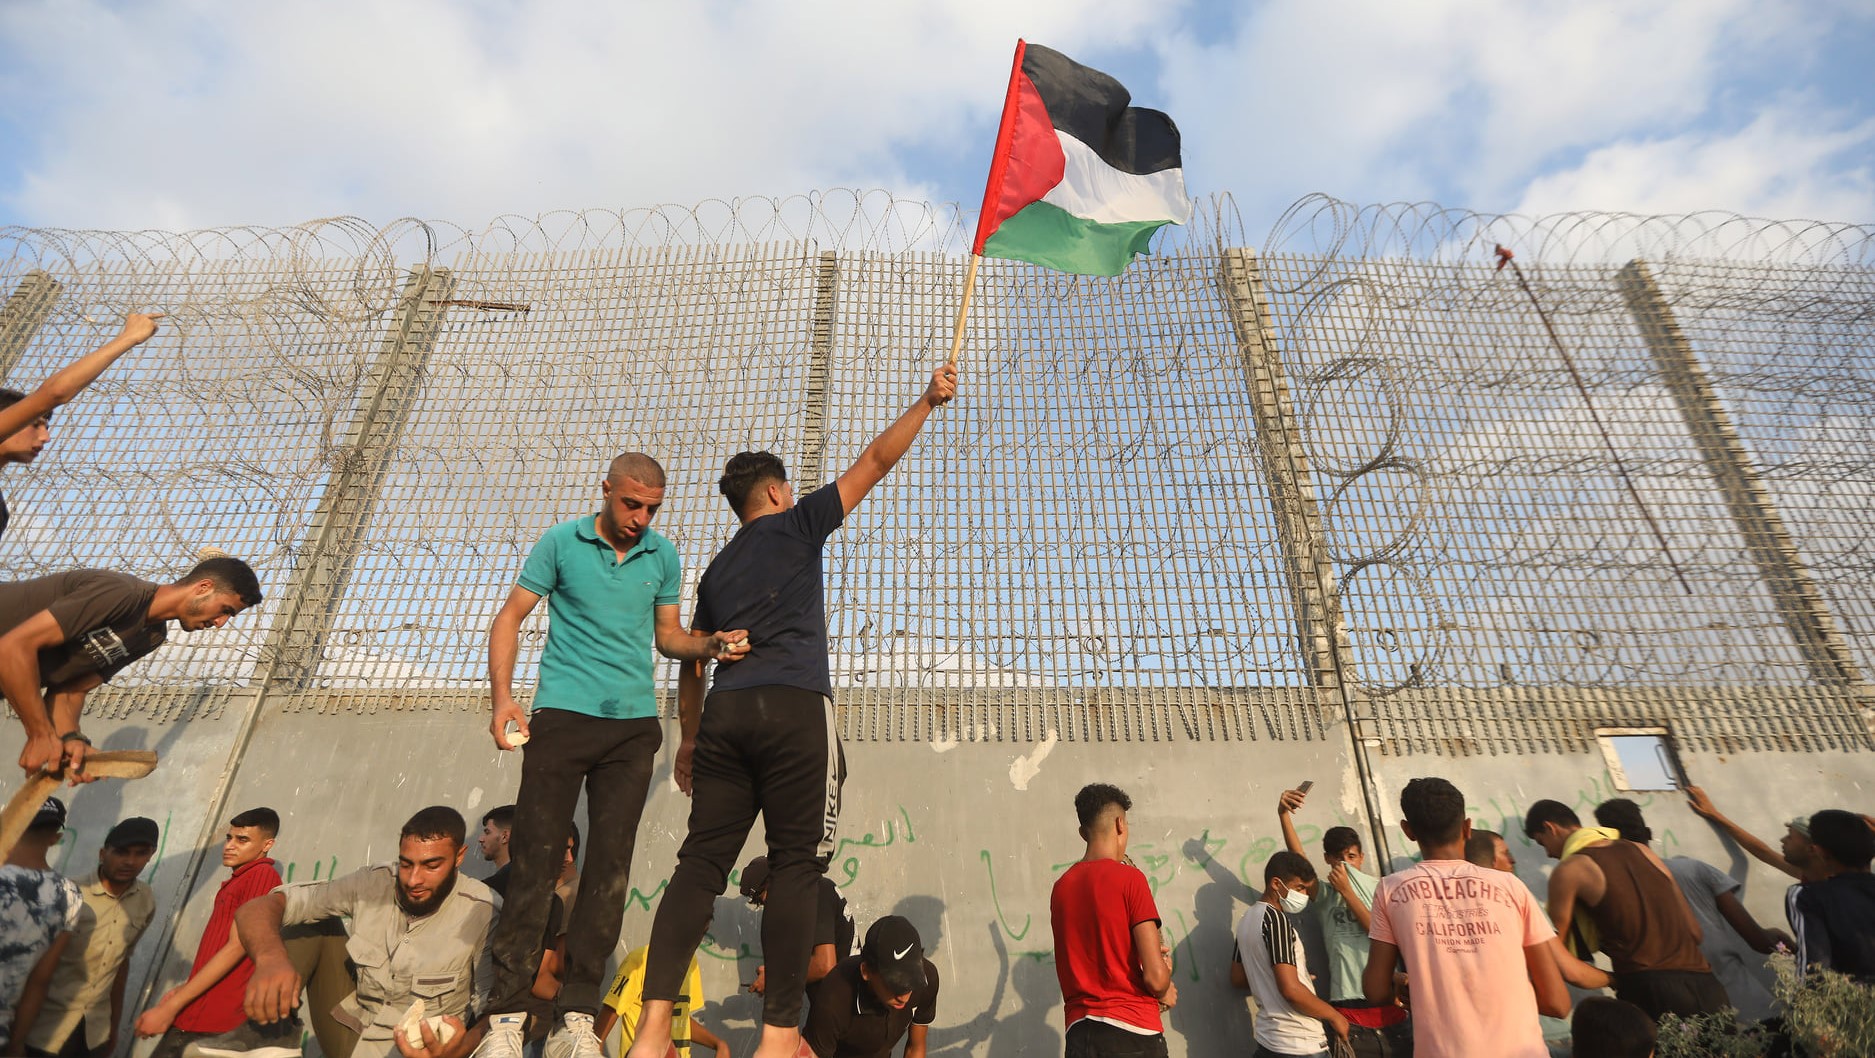 Palestinians along the border fence enclosing the Gaza Strip protest against the Israeli blockade that has been in place for over 14 years (Saturday August 21). Israeli soldiers responded with live fire, injuring 41 protesters, including critically injuring a 13-year-old. An Israeli Border Police sniper was also critically injured while positioned on the other side of the fence.